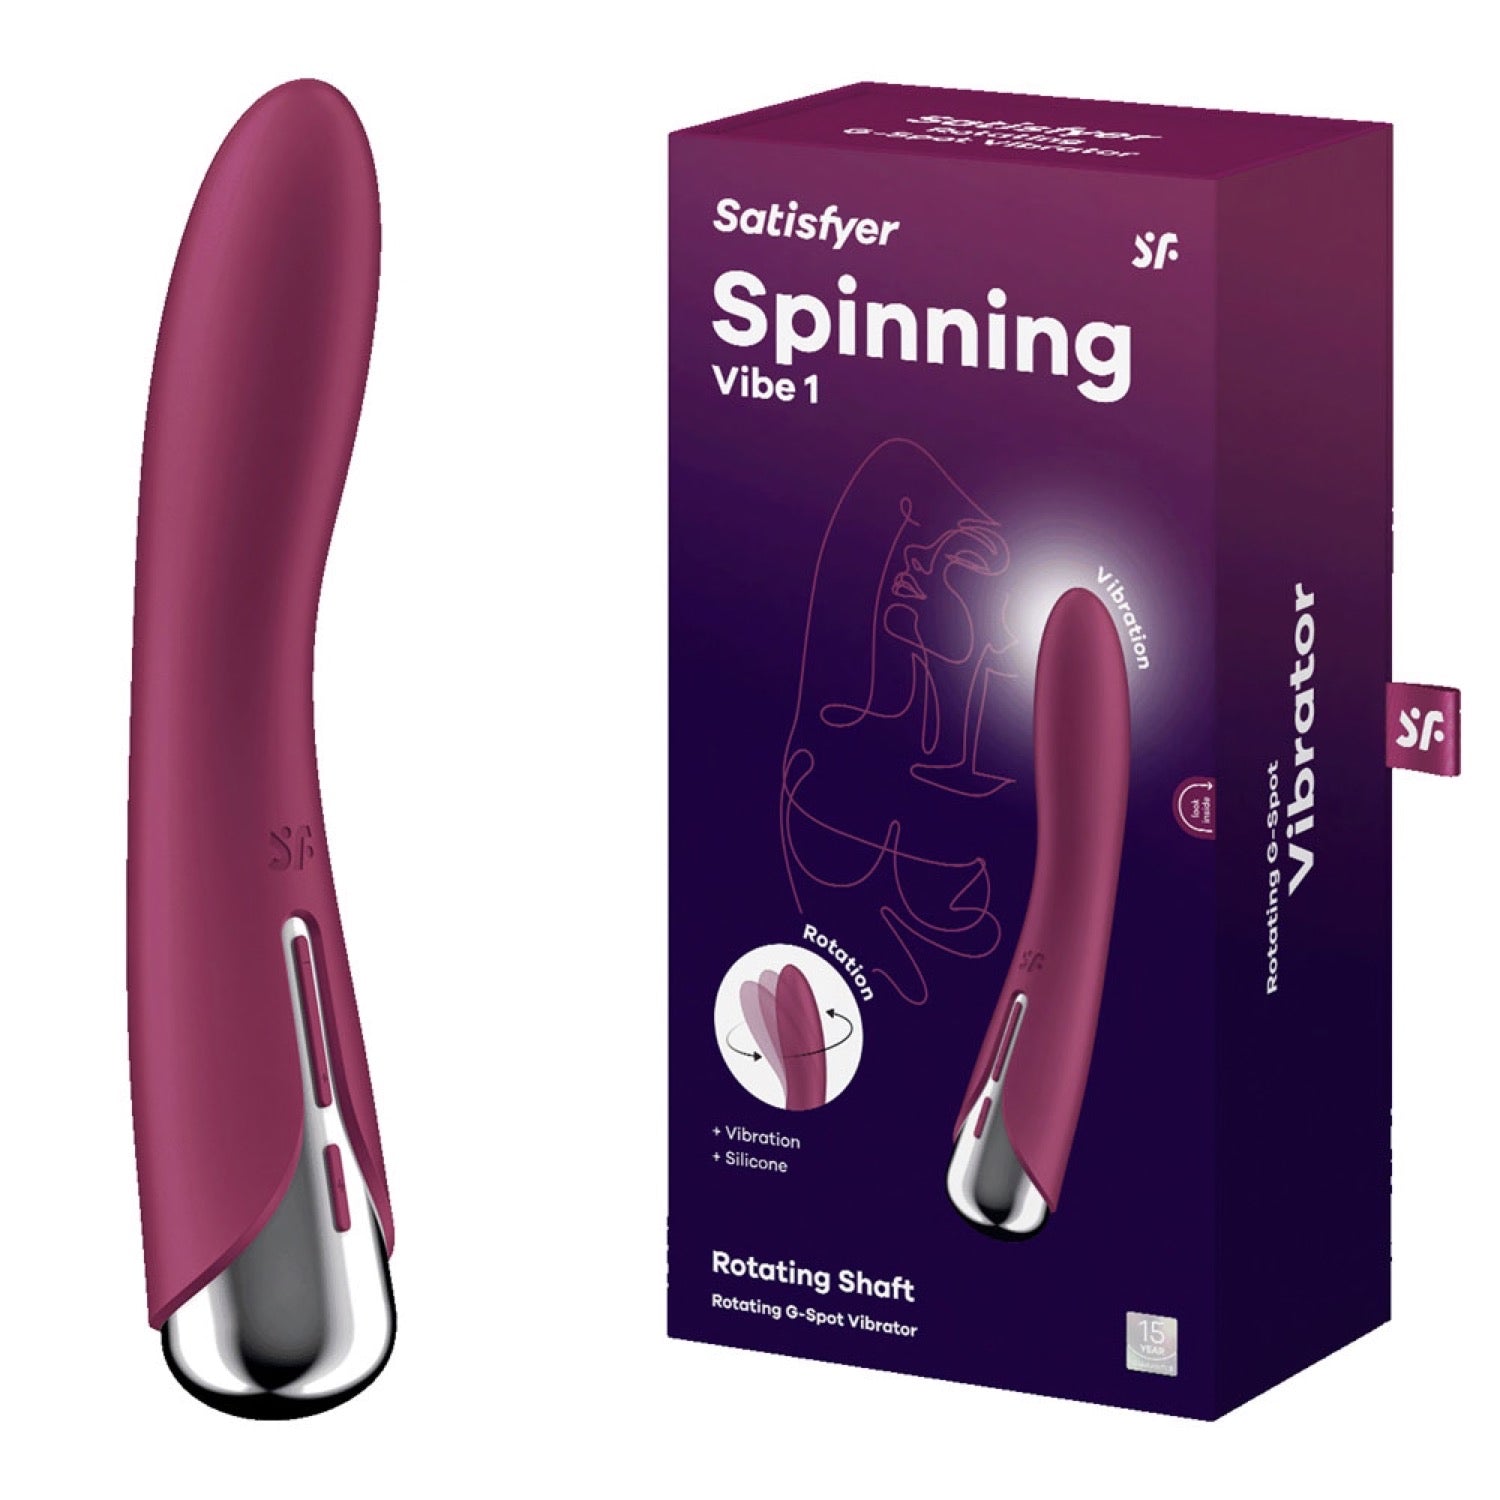 Satisfyer Spinning Vibe 1 - Red by Satisfyer